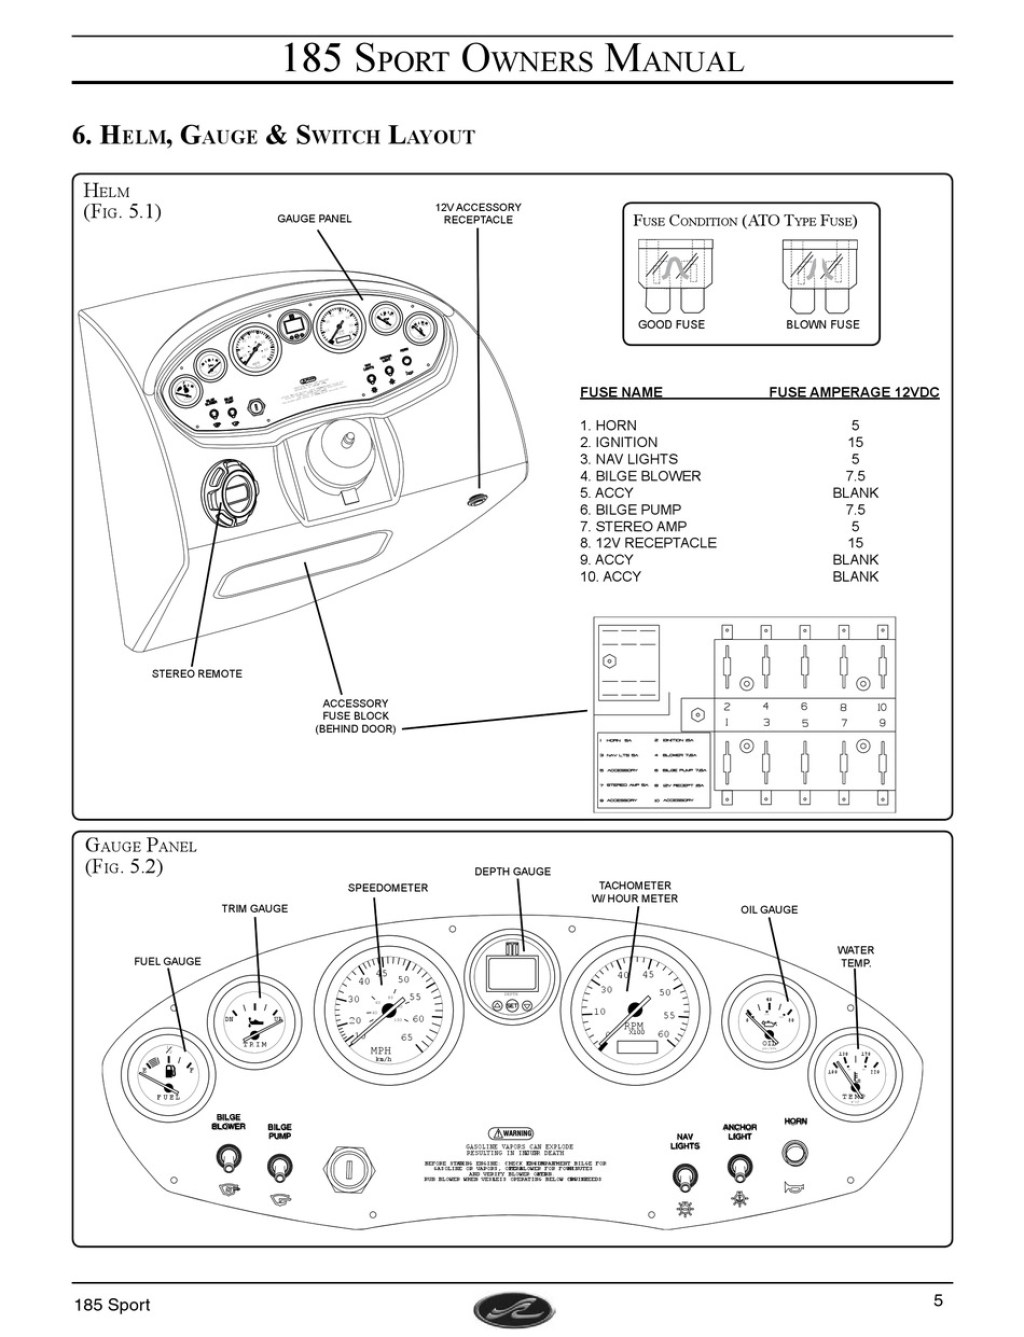 Picture of: Helm, Gauge & Switch Layout – Sea Ray  Sport Owner’s Manual